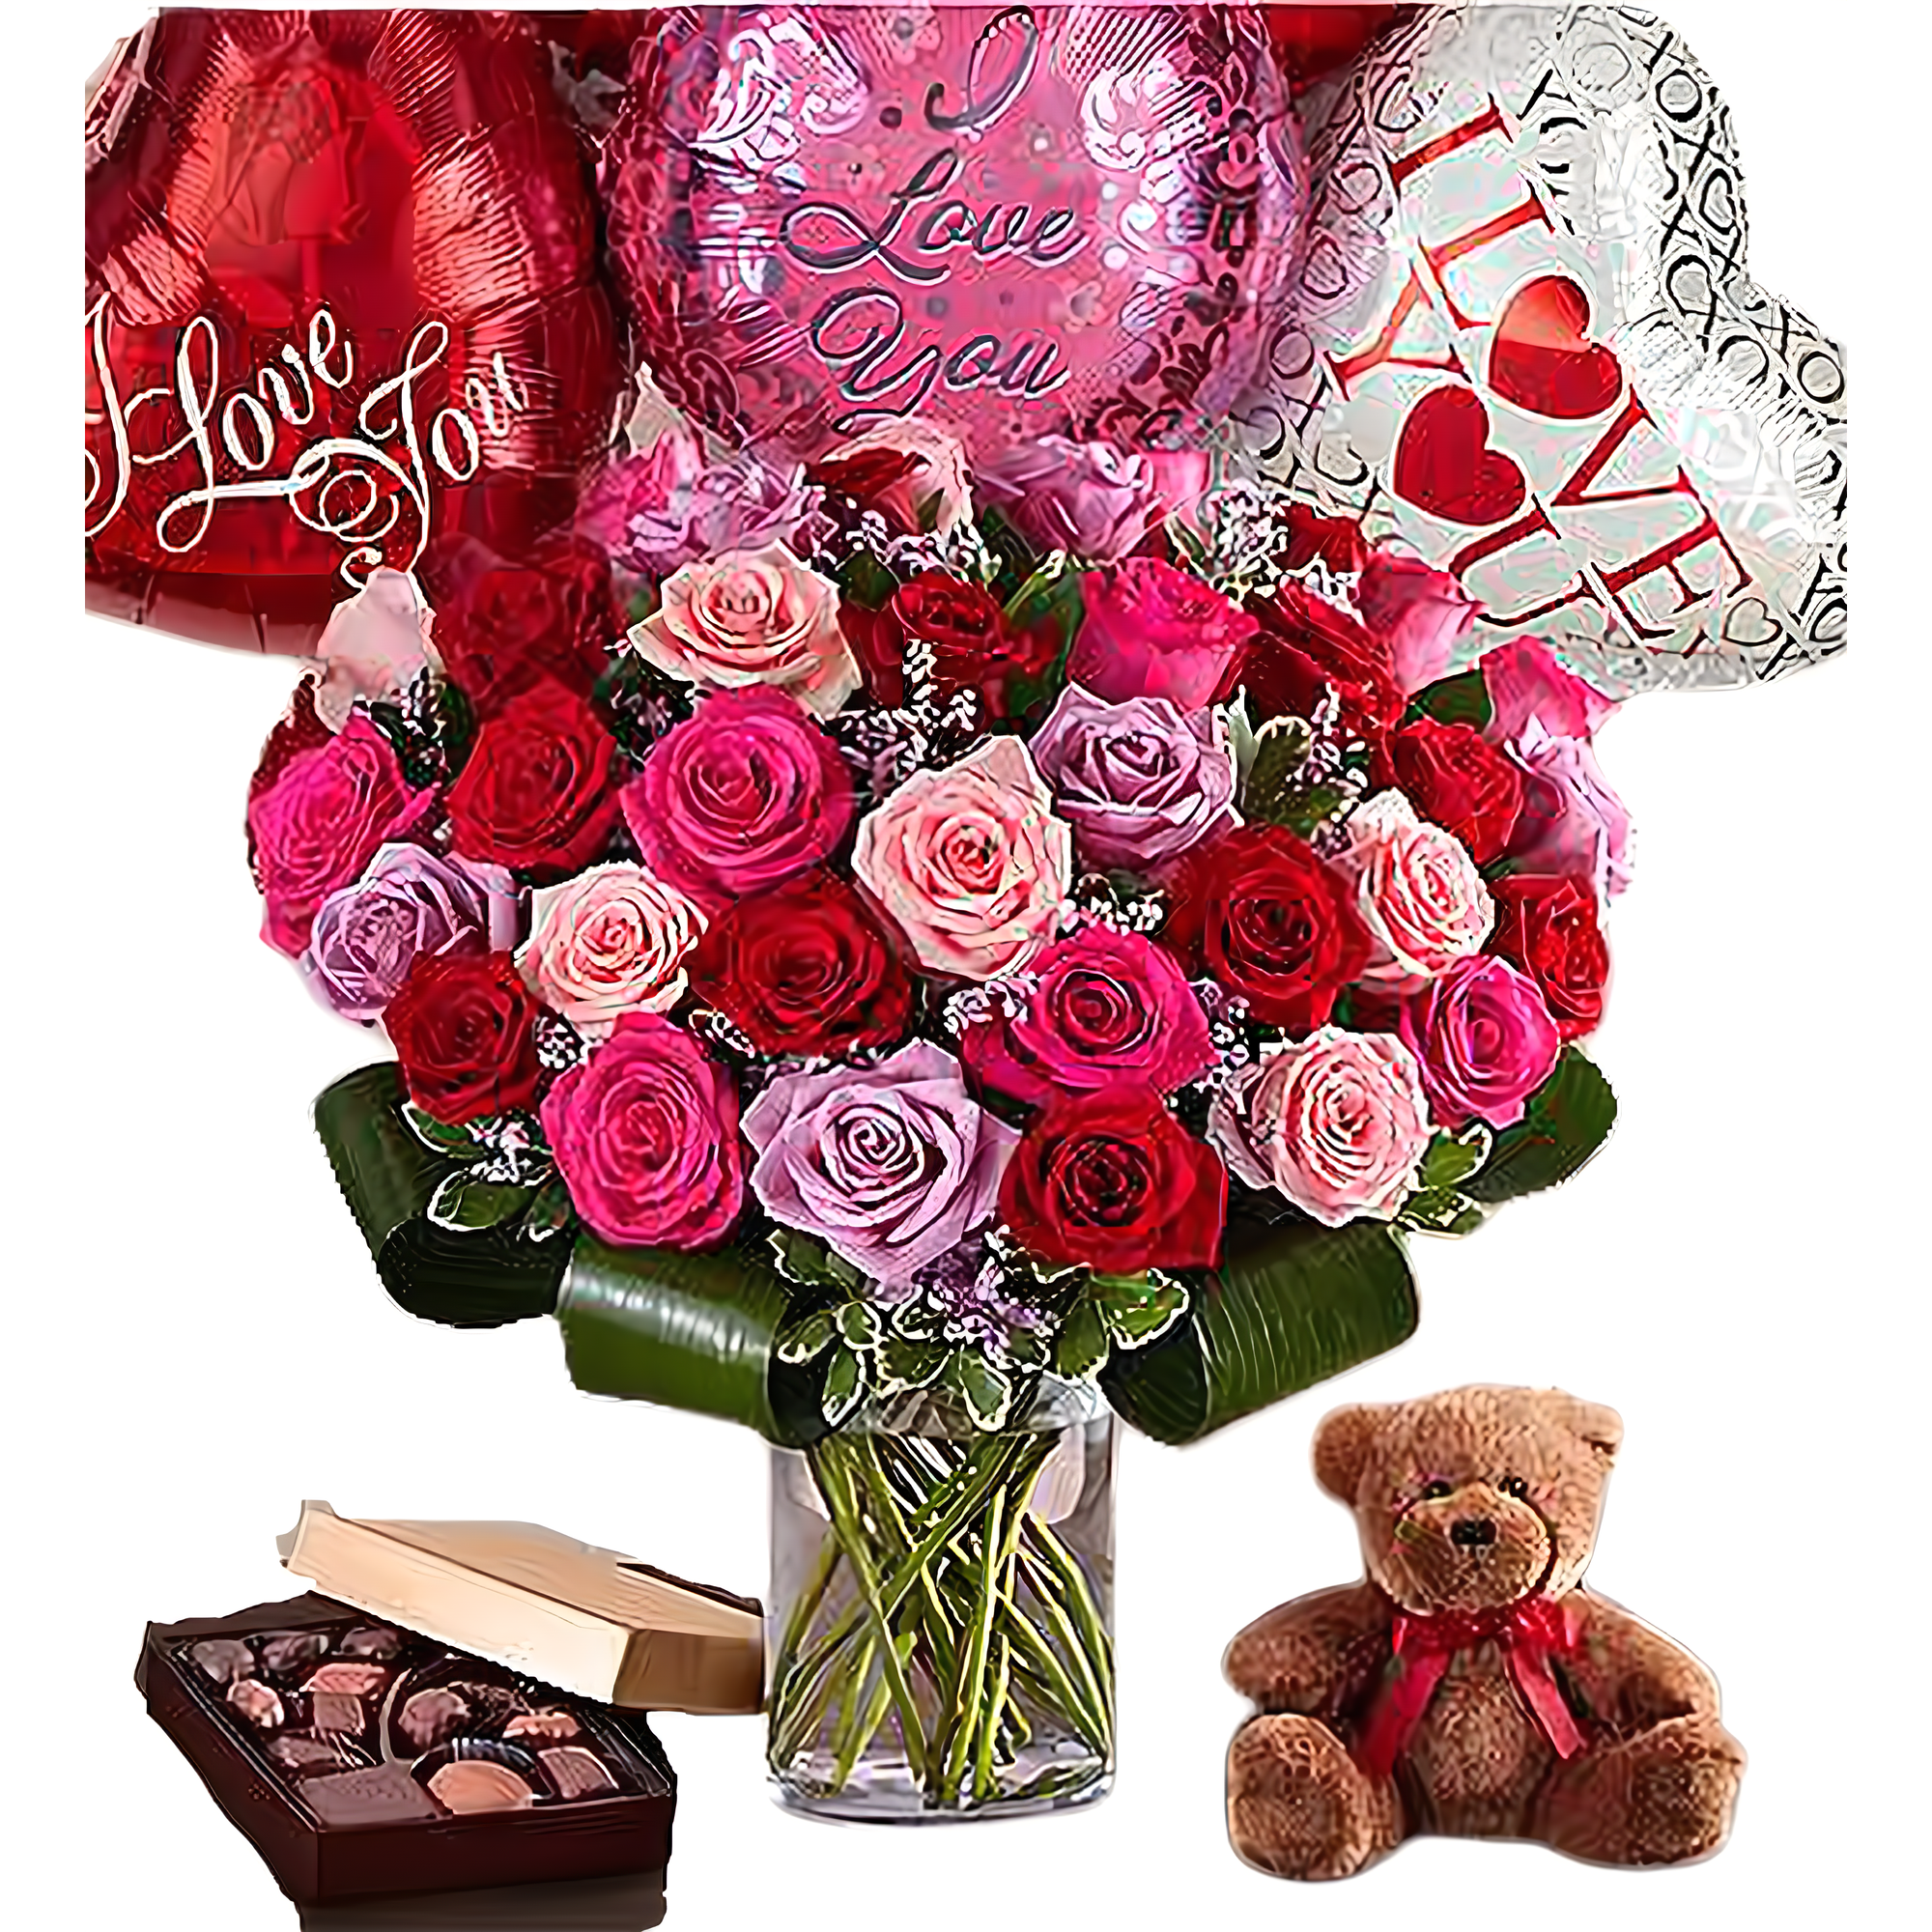 Premium Assorted Rose Bouquet w/ 6 Balloons, Teddy, & Chocolates - Occasions > Anniversary